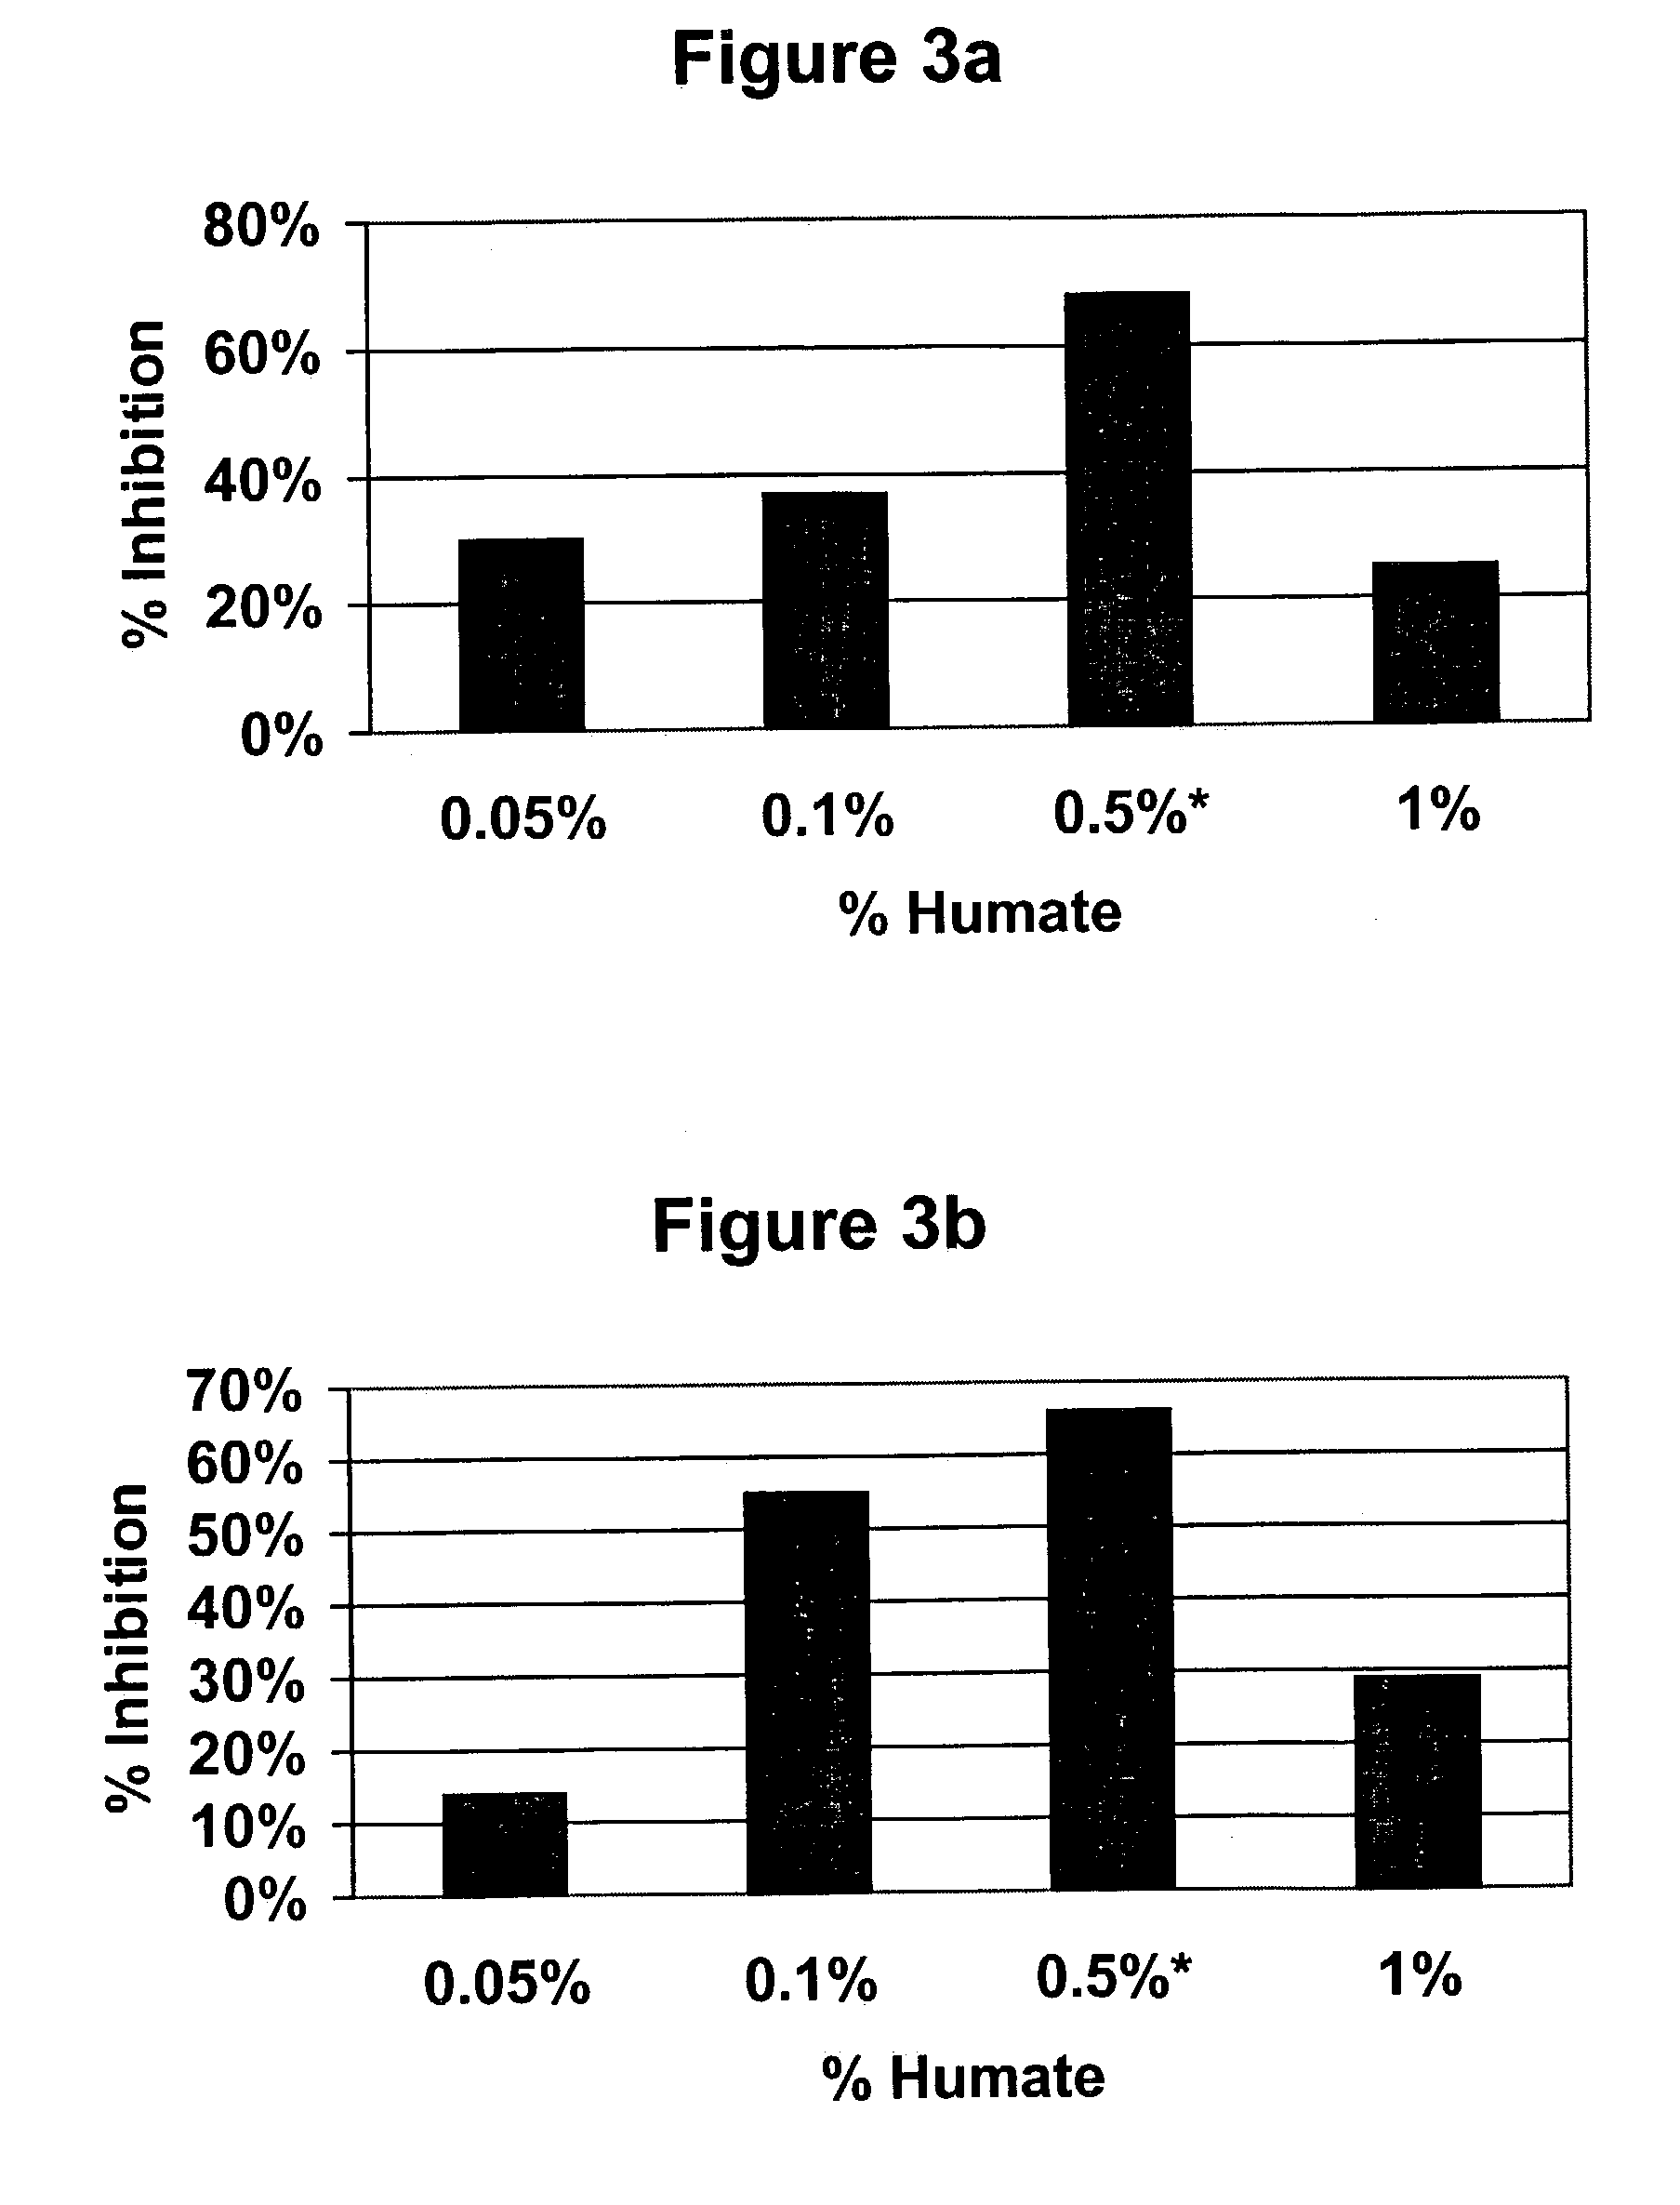 Anti-inflammatory humate compositions and methods of use thereof